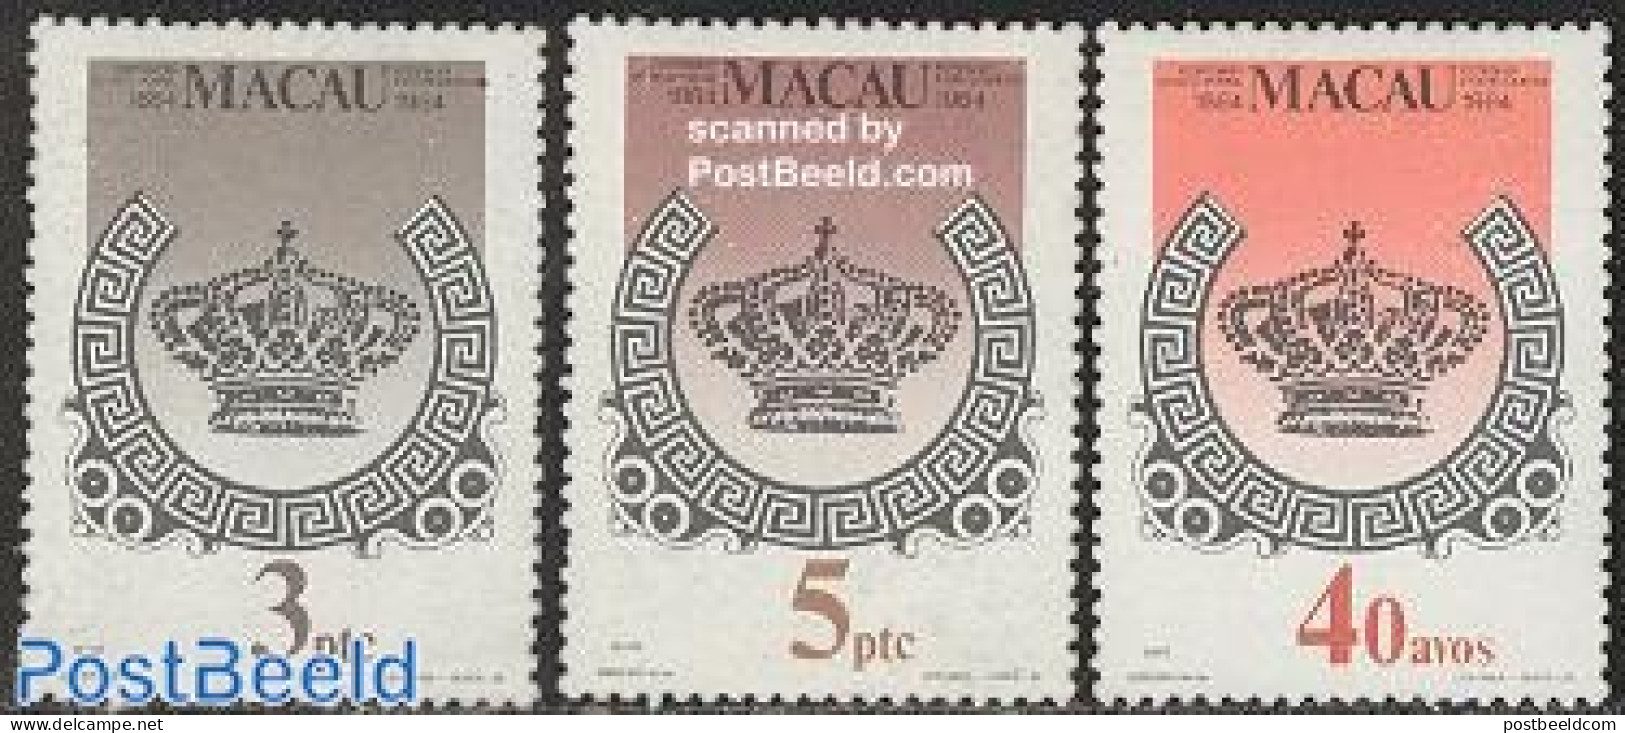 Macao 1984 Stamp Centenary 3v, Mint NH, 100 Years Stamps - Post - Stamps On Stamps - Unused Stamps